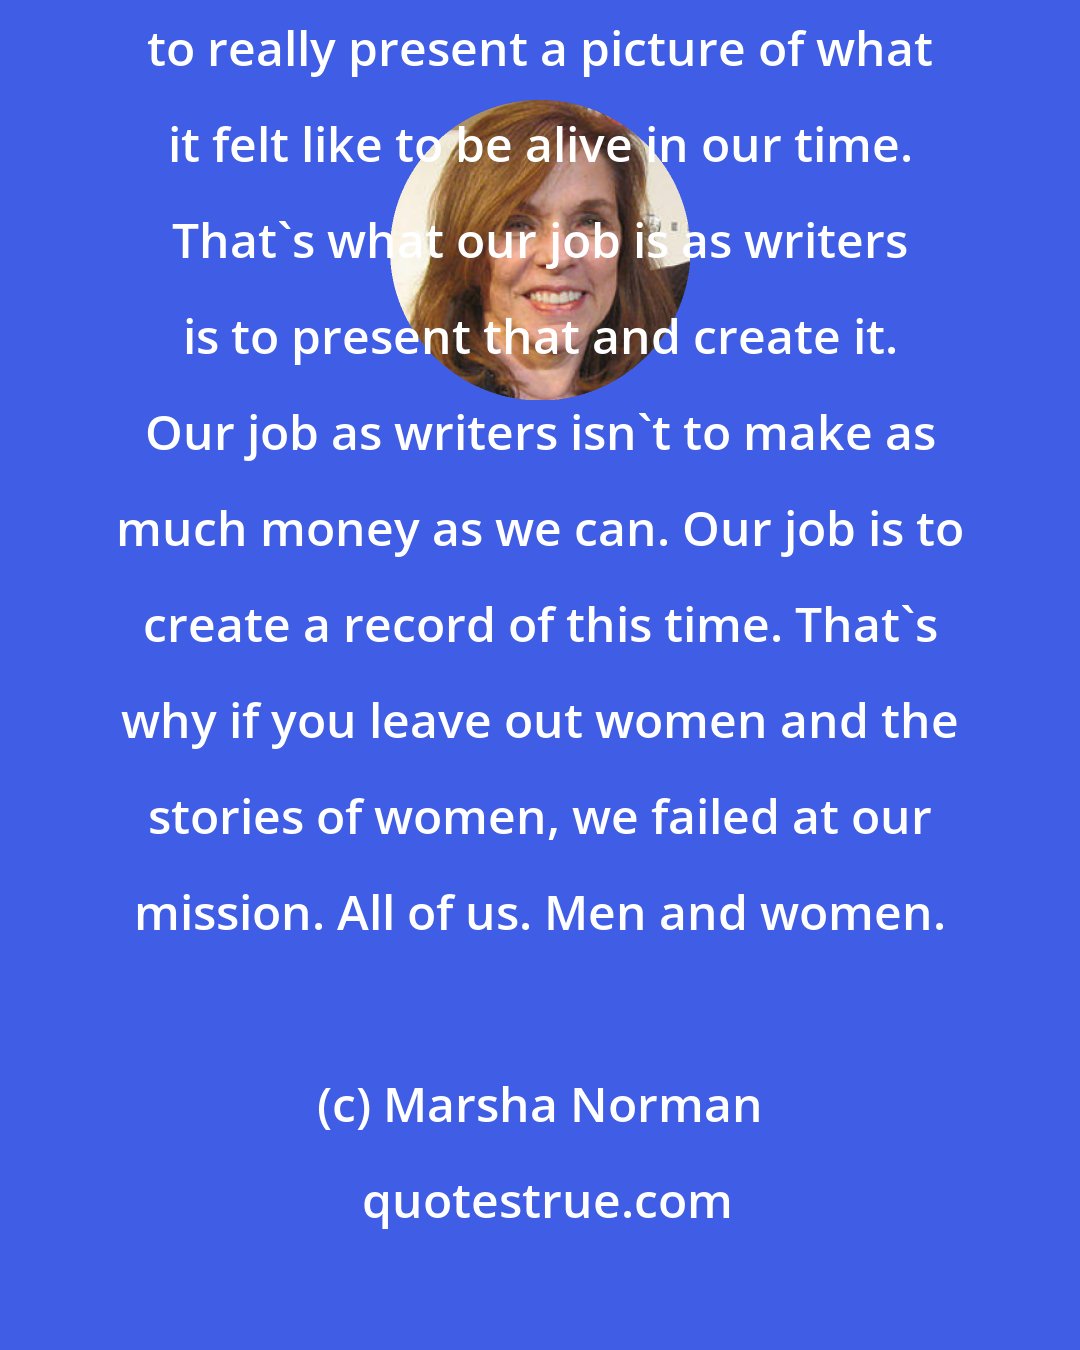 Marsha Norman: We have to hear the stories of women at all ages of their lives in order to really present a picture of what it felt like to be alive in our time. That's what our job is as writers is to present that and create it. Our job as writers isn't to make as much money as we can. Our job is to create a record of this time. That's why if you leave out women and the stories of women, we failed at our mission. All of us. Men and women.